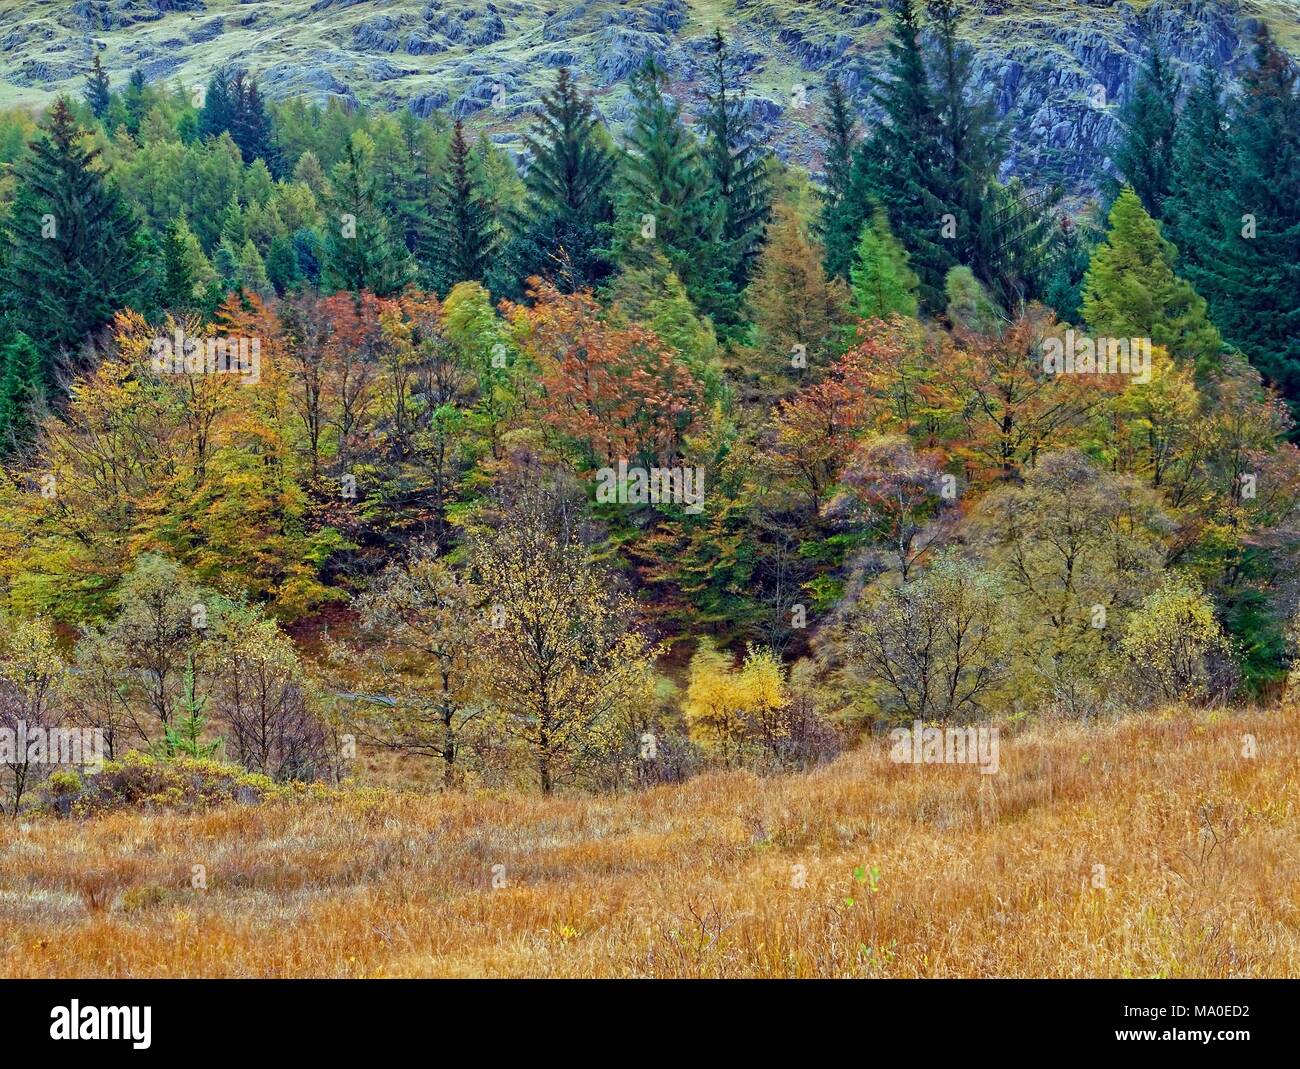 An autumn view of colorful deciduous trees in the Langdale Fells in the Lake District, England. Stock Photo